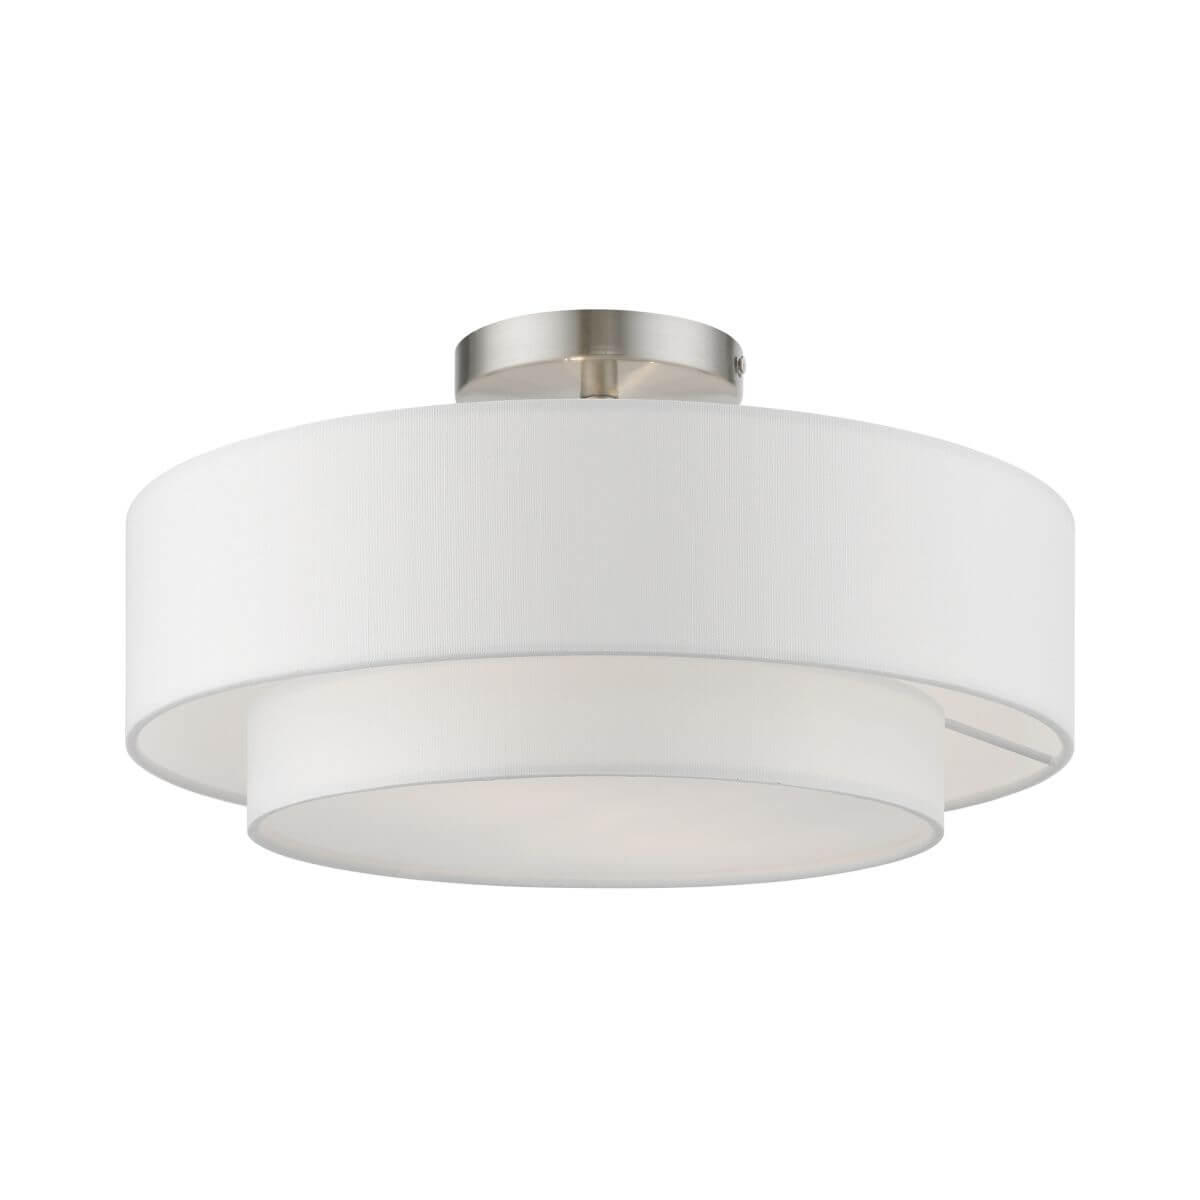 Livex 47153-91 Meridian 2 Light 15 inch Semi-Flush Mount in Brushed Nickel with Hand Crafted Off-white Hardback Fabric Shade - White Fabric Inside